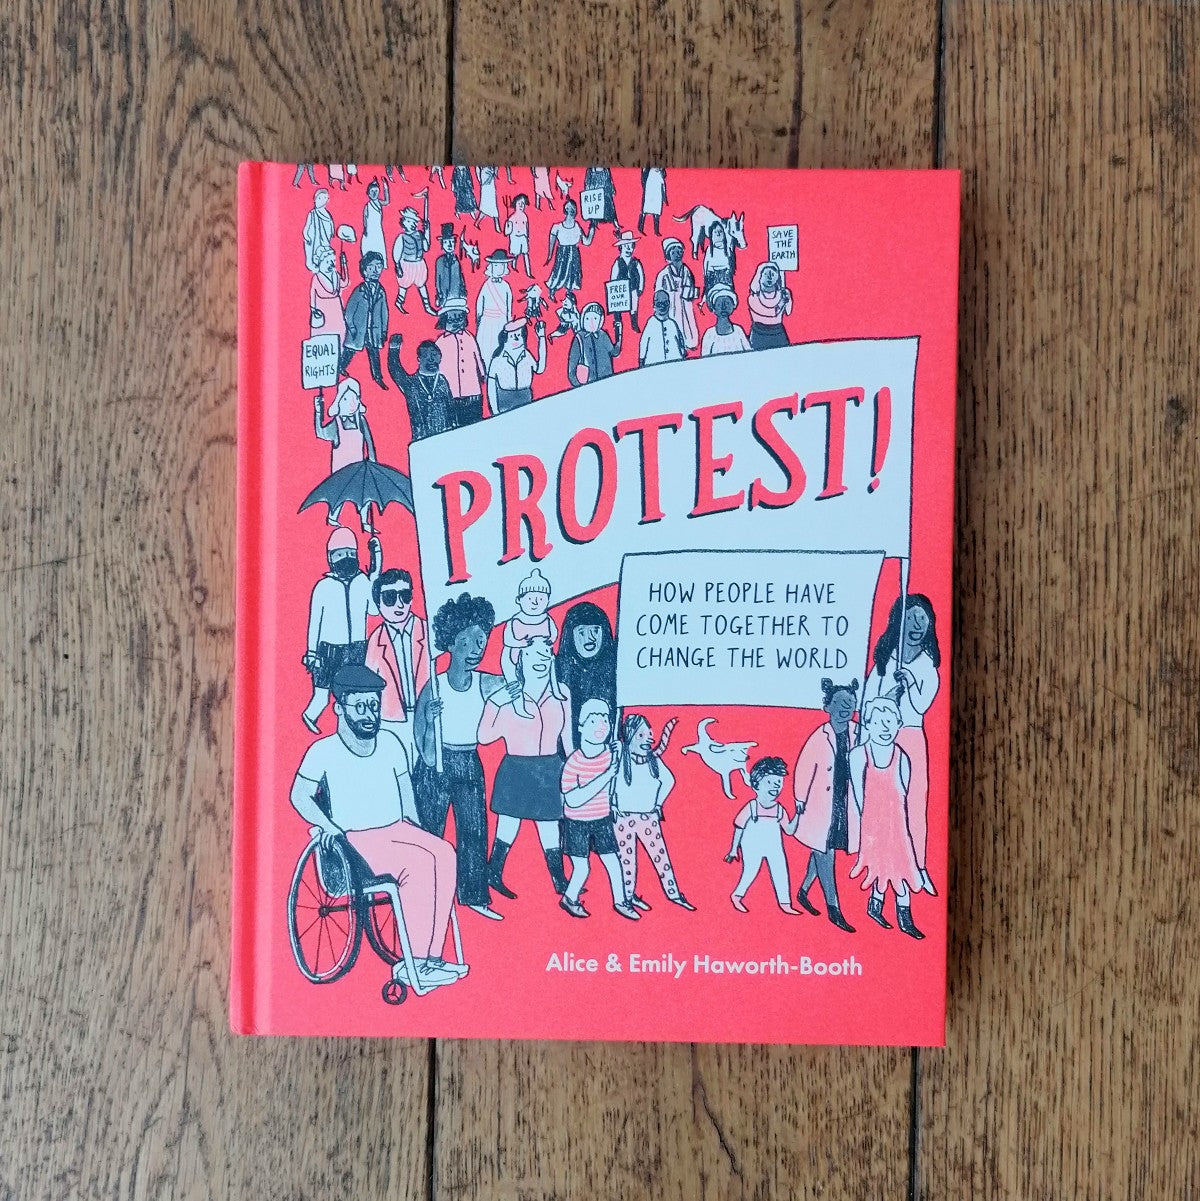 Protest! How people have come together to change the world by Alice & Emily Haworth-Booth | Image courtesy of People's History Museum shop